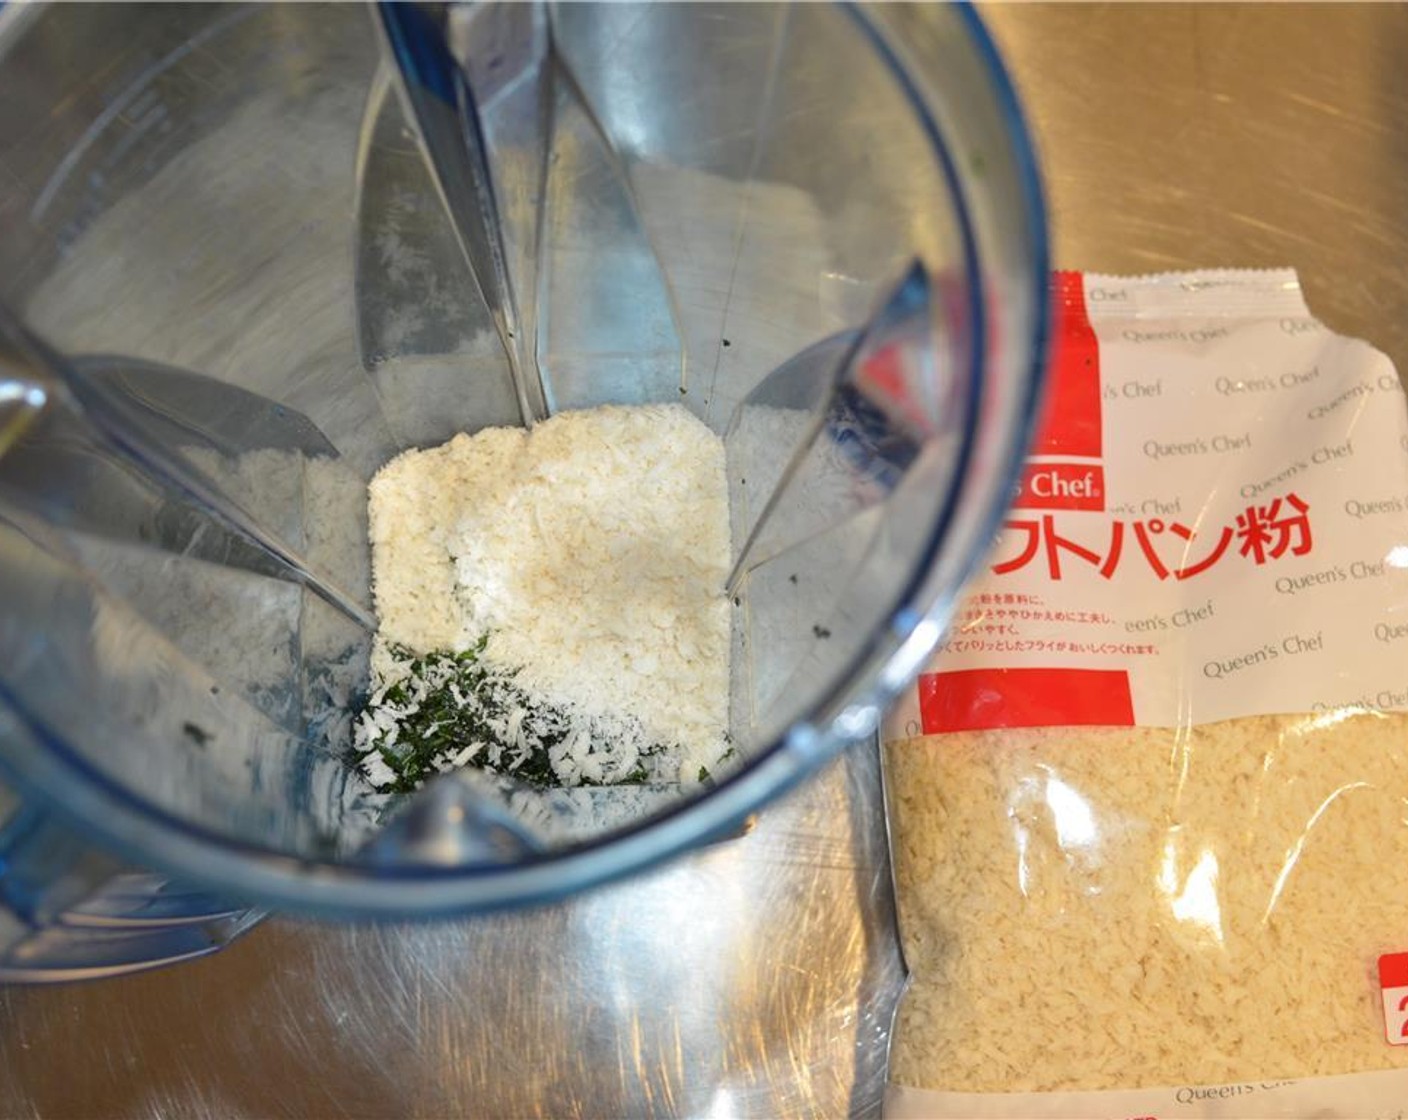 step 7 Place the basil in a food processor or blender together with the Panko Breadcrumbs (4 cups) and blend until finely ground and bright green. Pour into a bowl and set aside.